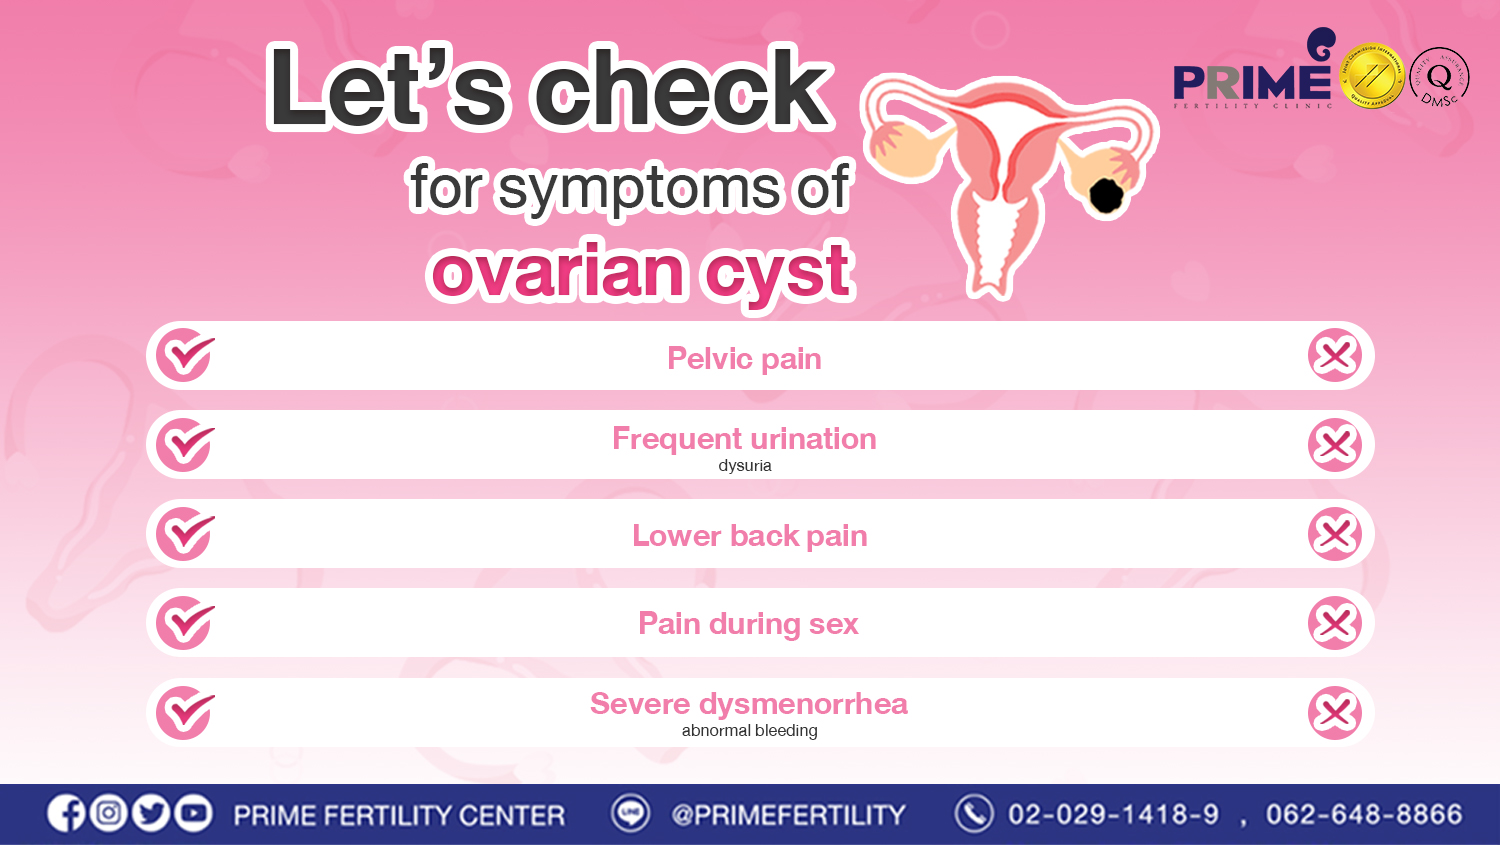 Let’s check for symptoms of ovarian cyst